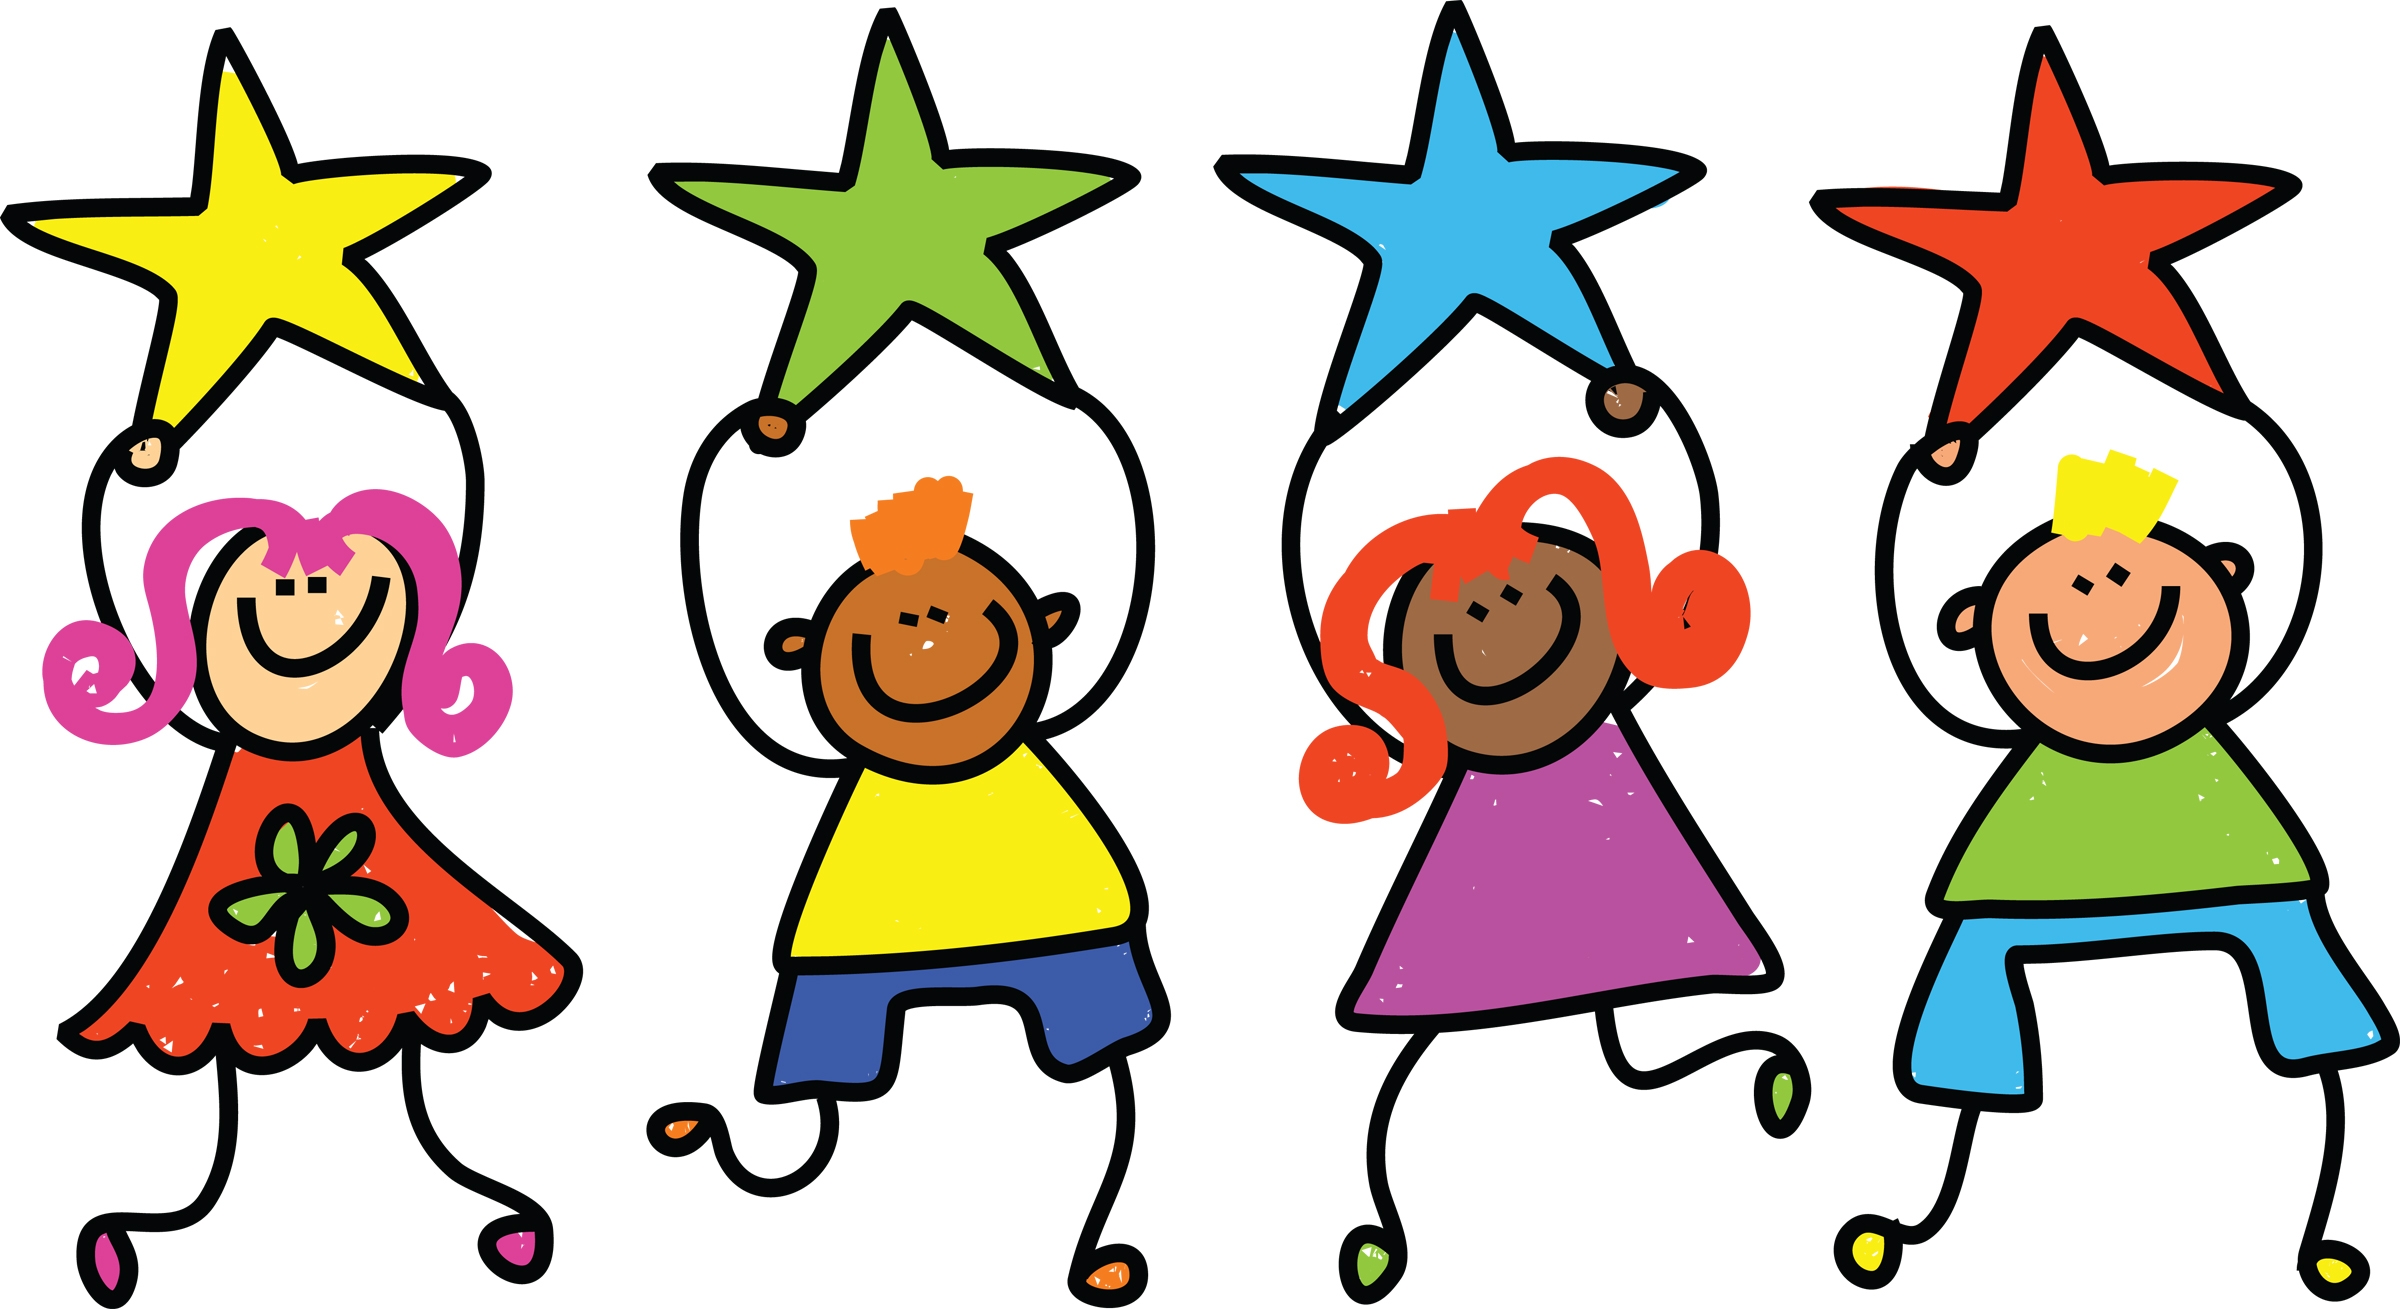 Students working free clipart